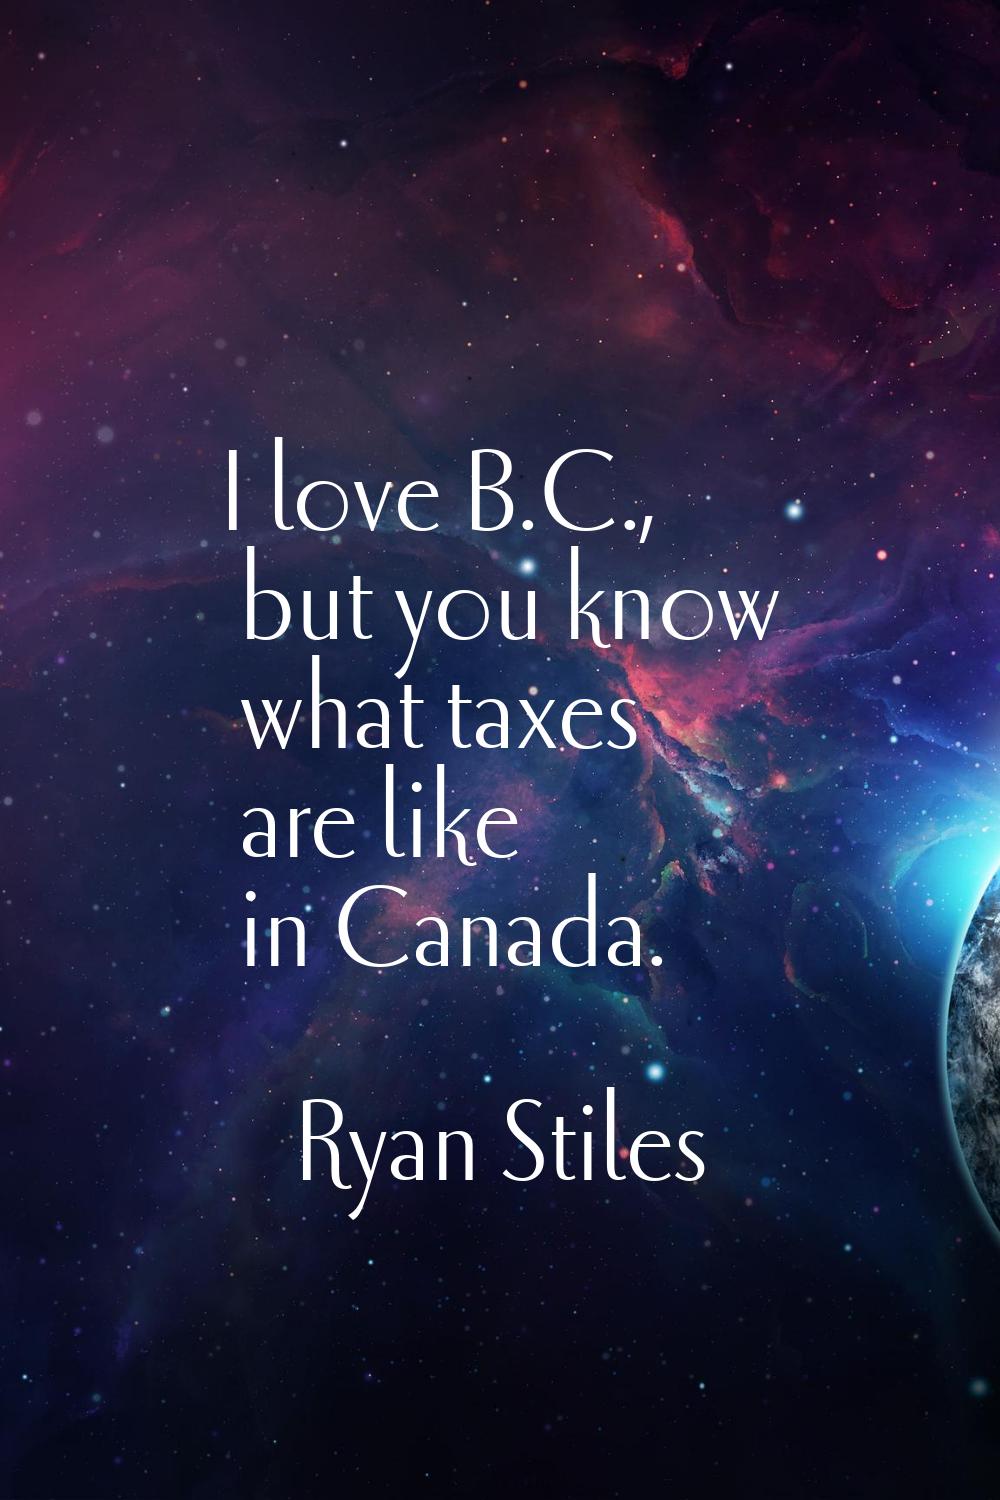 I love B.C., but you know what taxes are like in Canada.